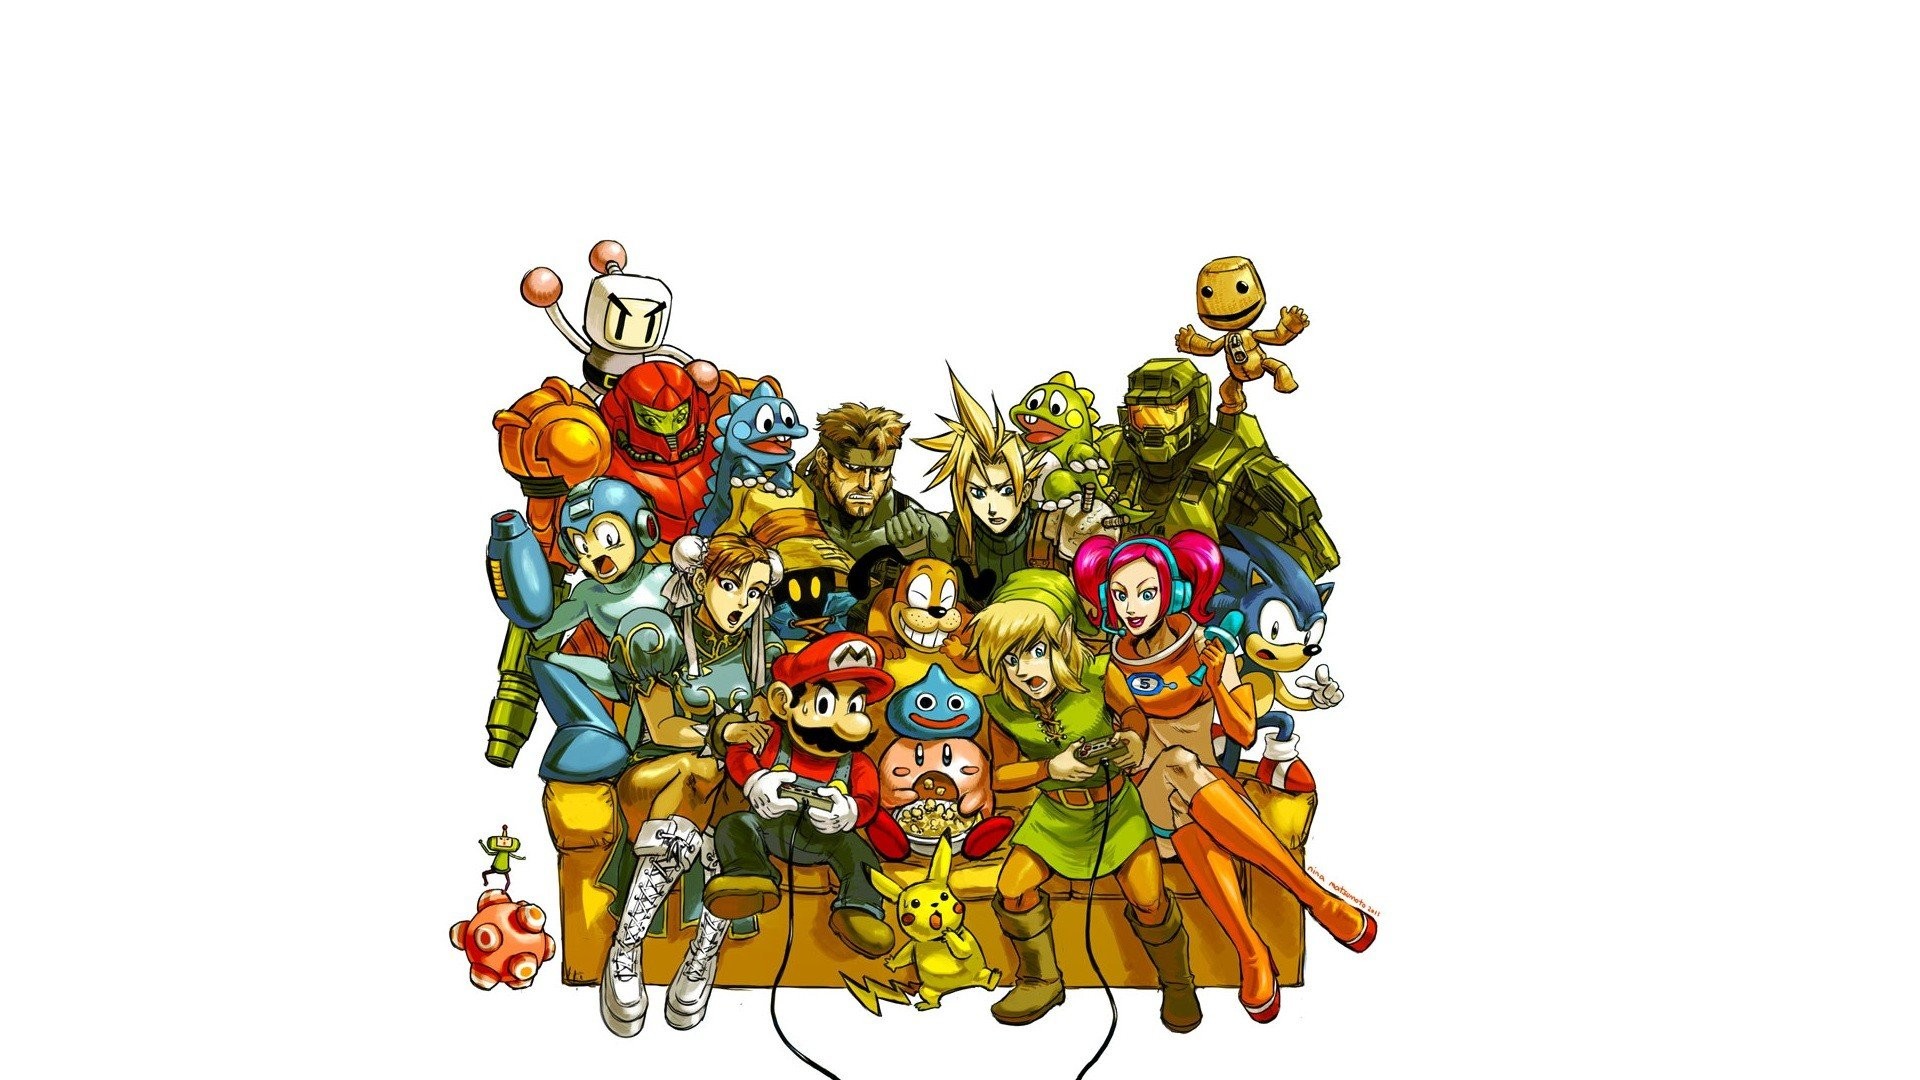 1920x1080 Videogame Characters Mega Man Sonic The Hedgehog Solid Snake Master Chief  Cloud Strife Bomberman